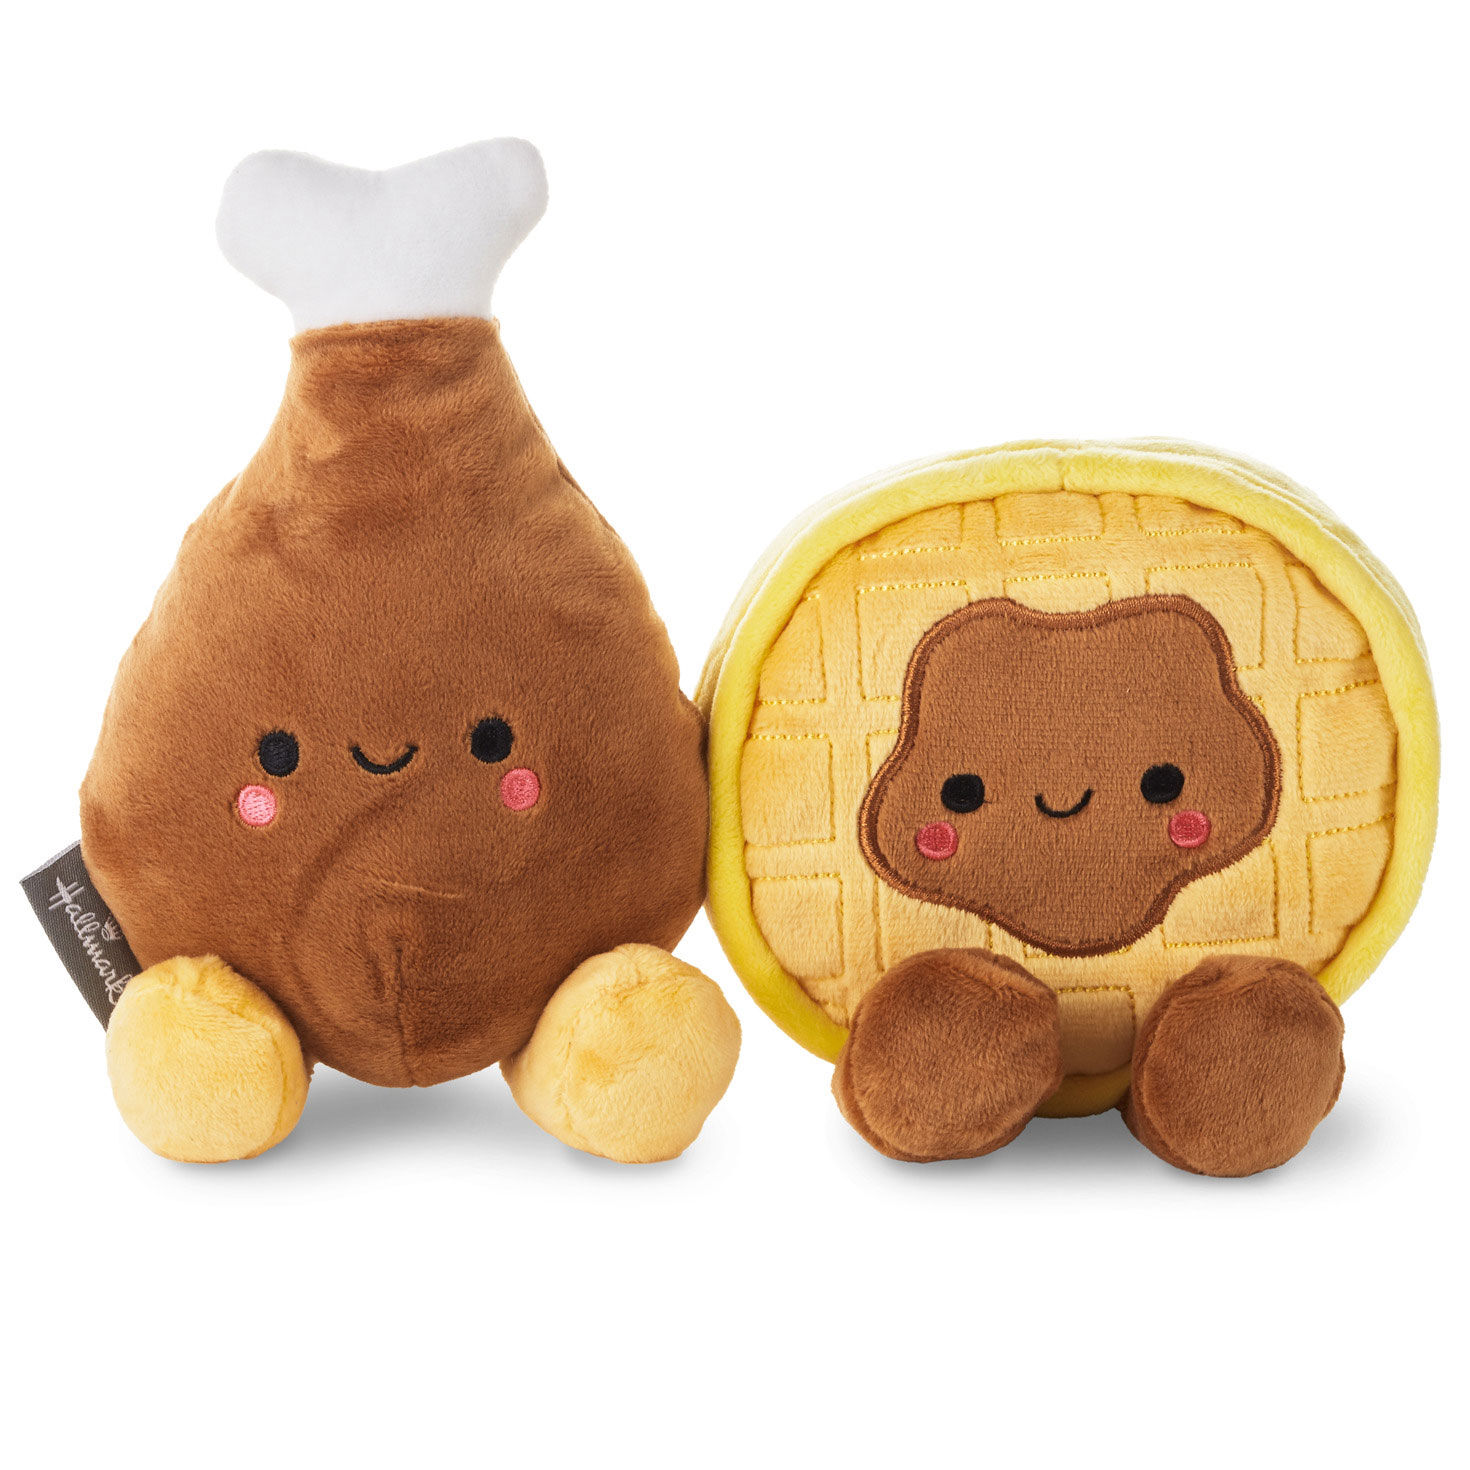 Better Together Chicken and Waffle Magnetic Plush, 6.75" for only USD 16.99 | Hallmark